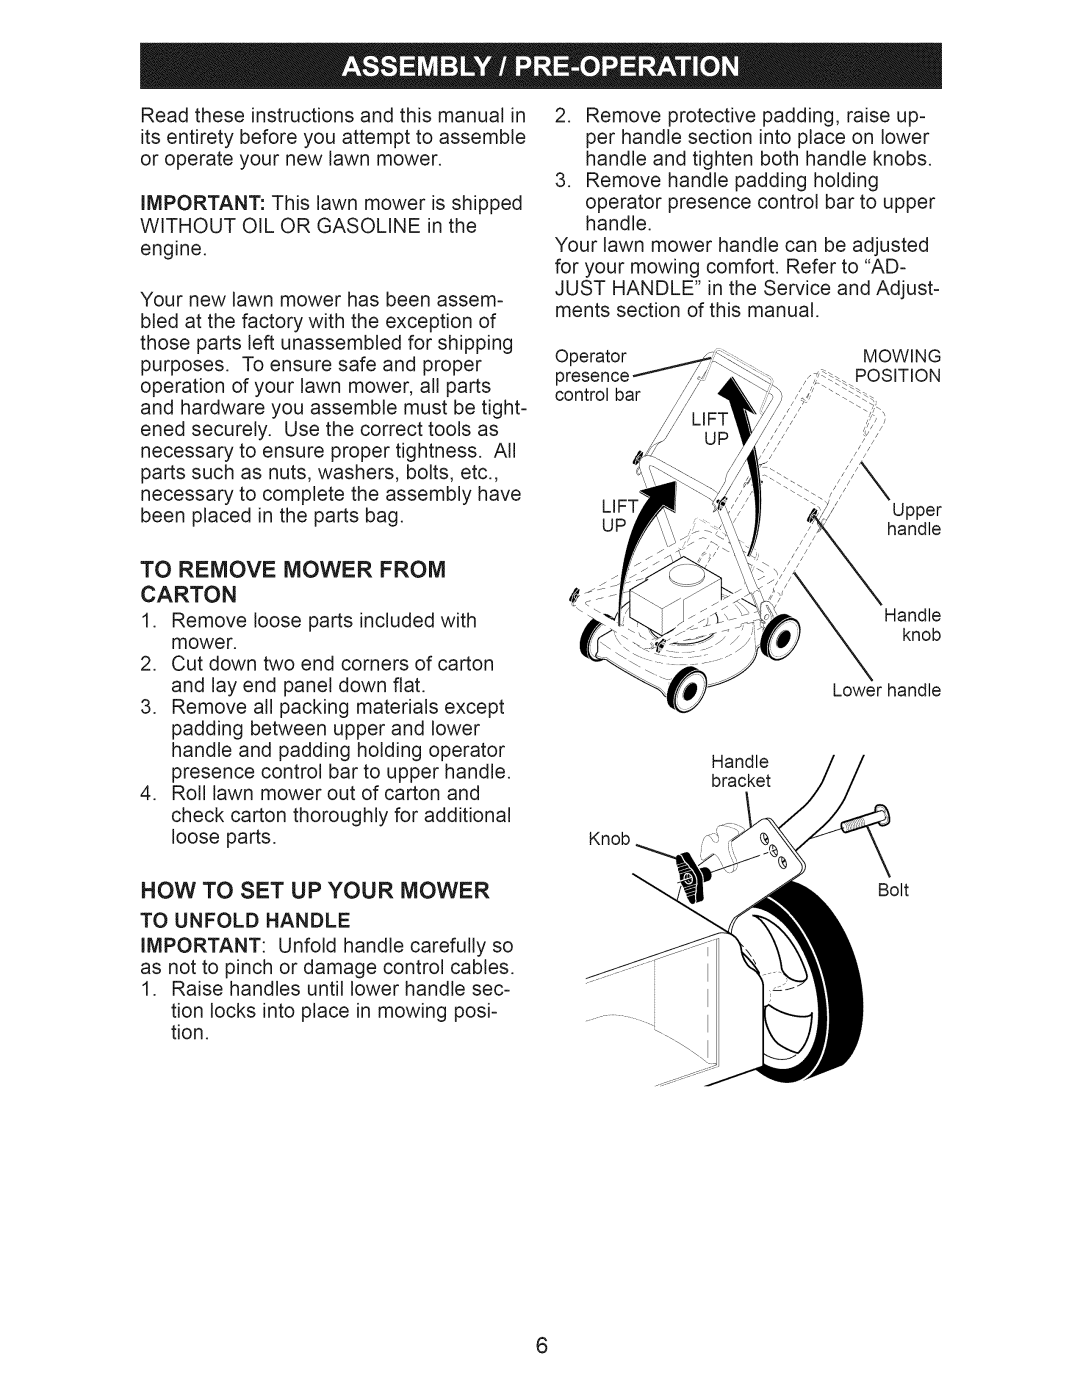 Craftsman 917.374101 manual Now To Set Up Your Mower, To Remove Mower From Carton 